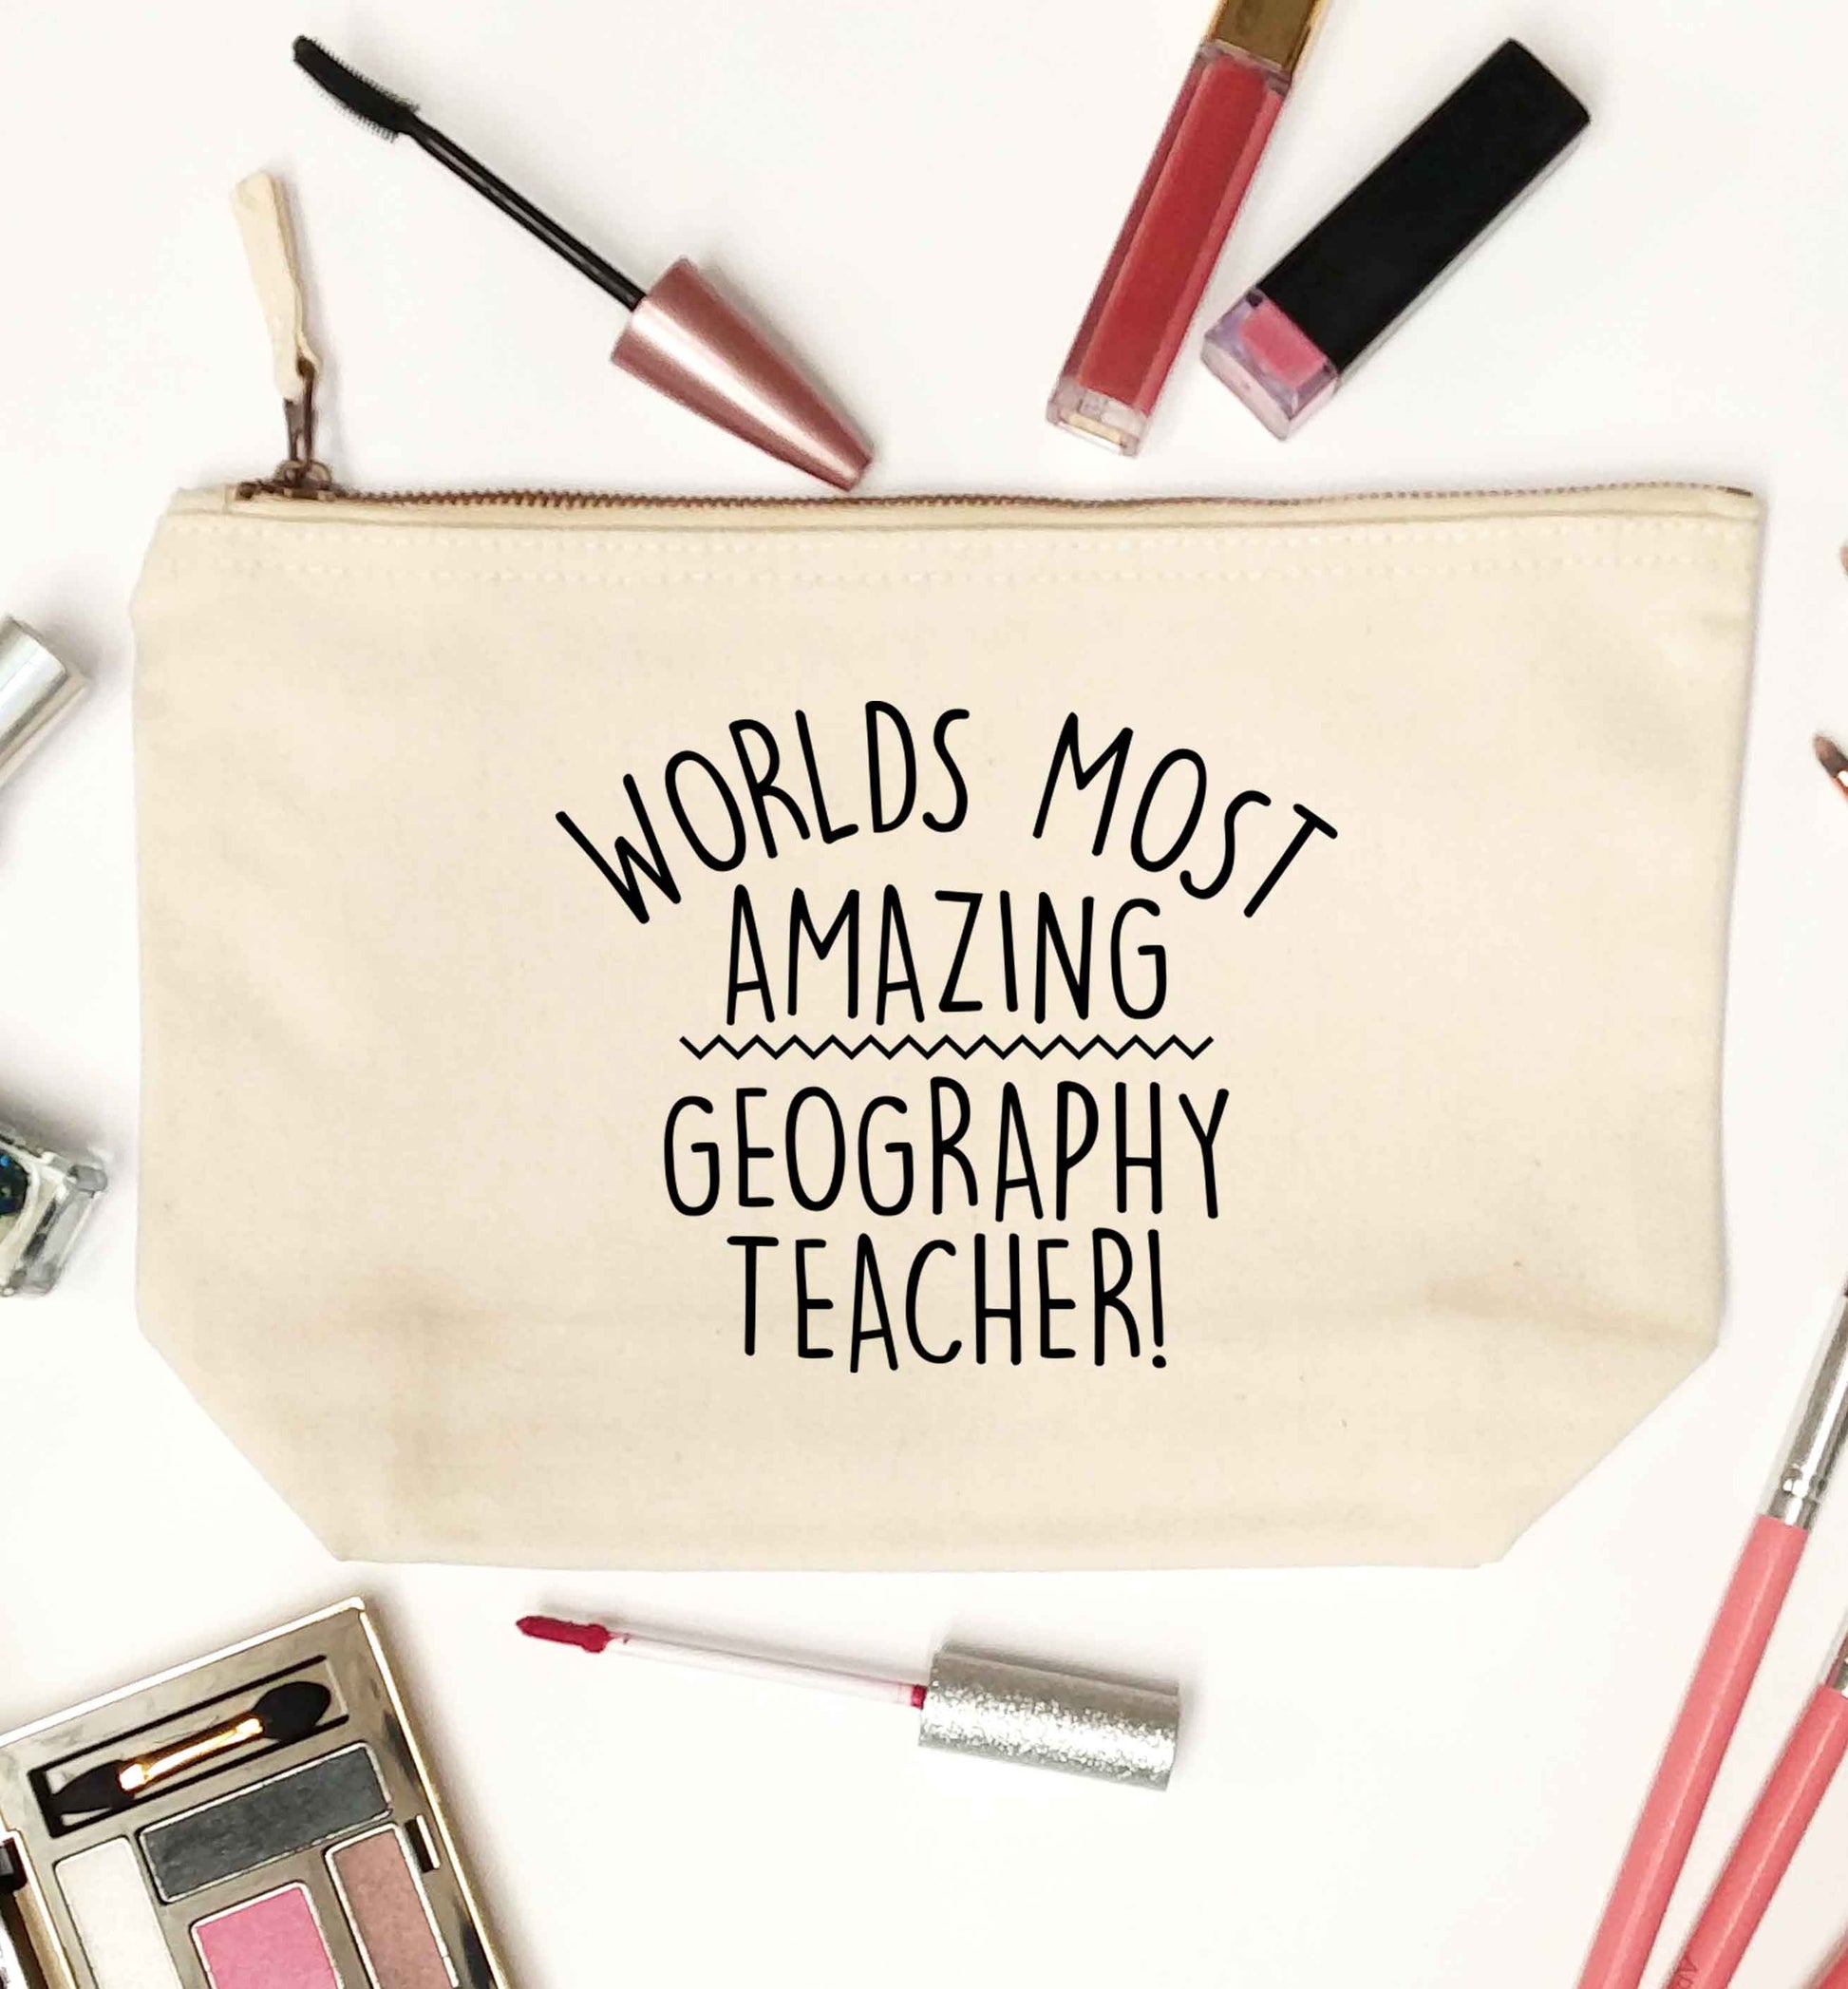 Worlds most amazing geography teacher natural makeup bag